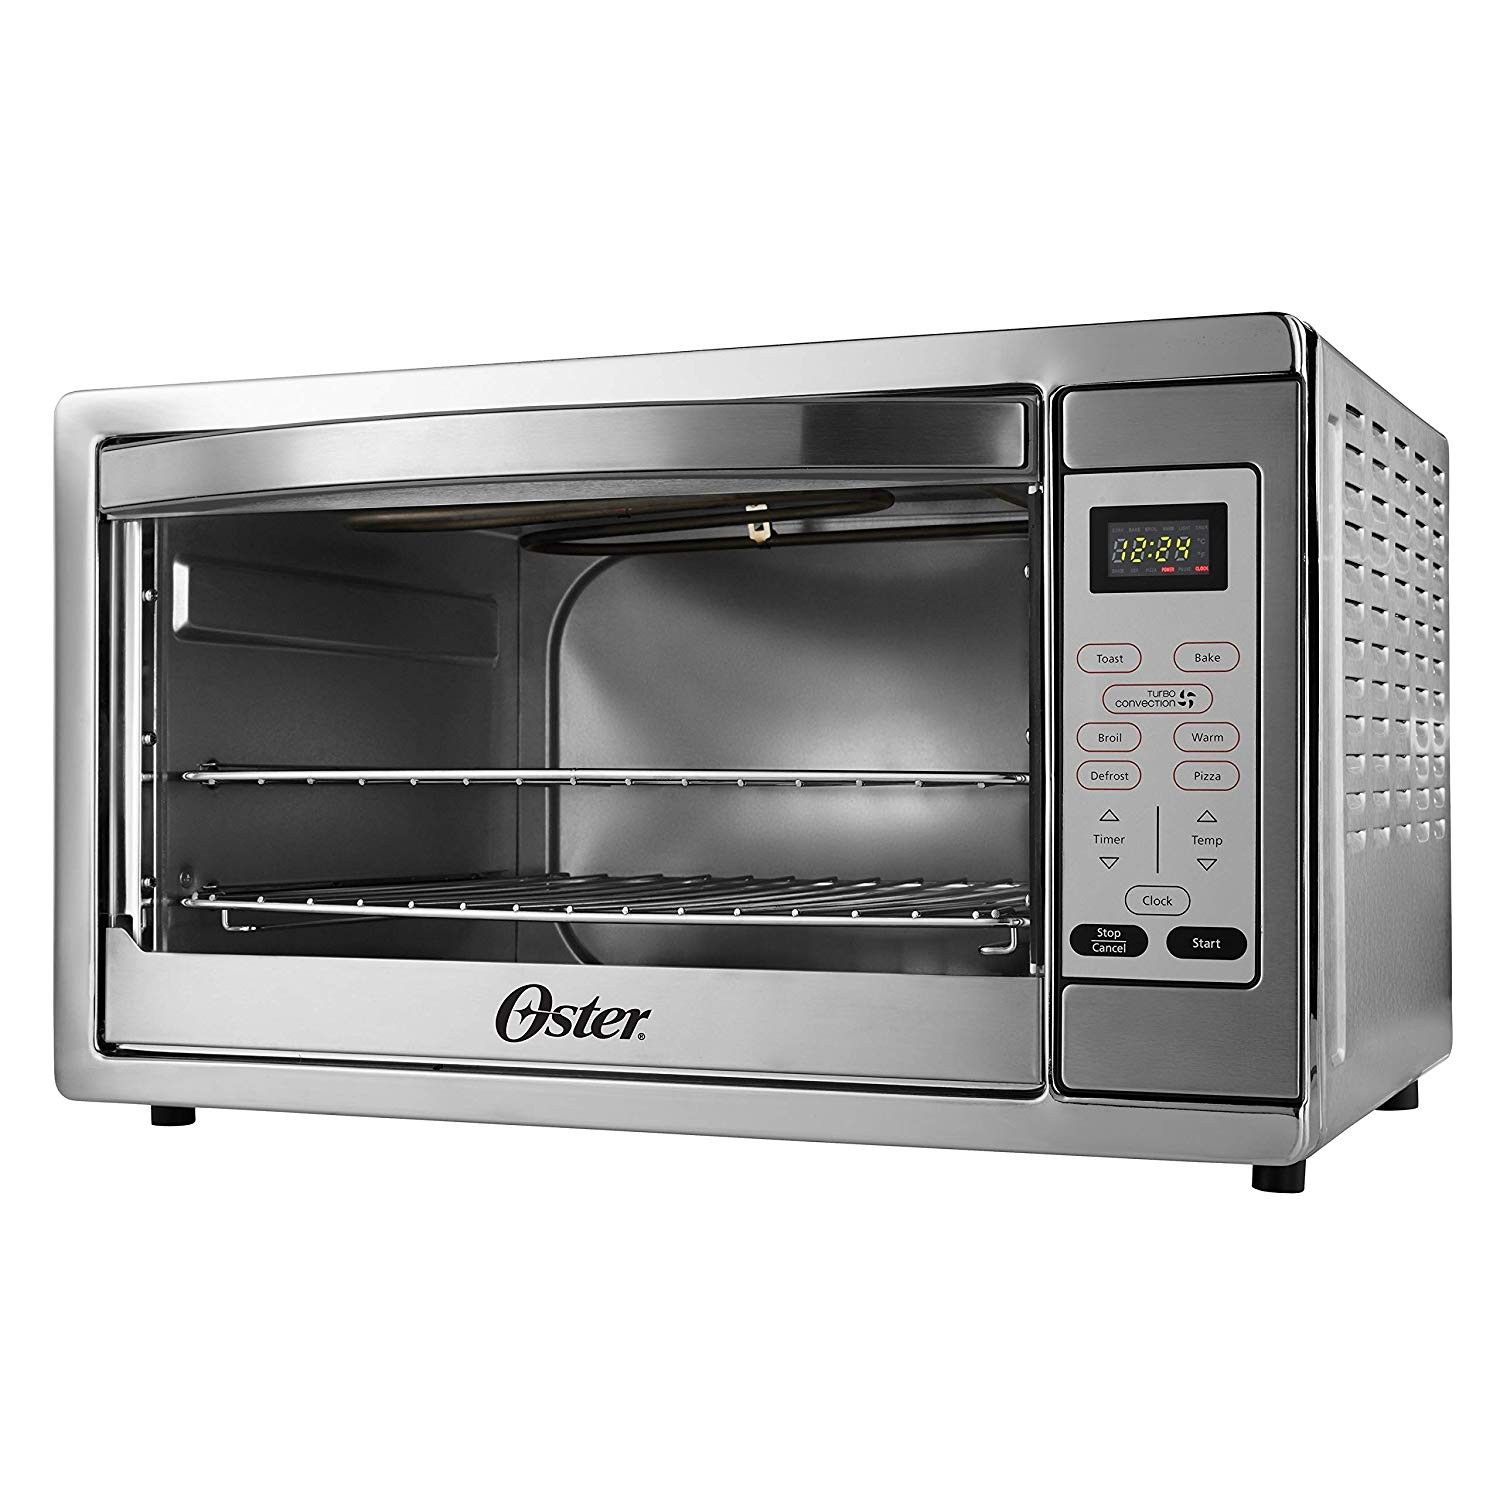 Brand New never use Oster convection oven $50